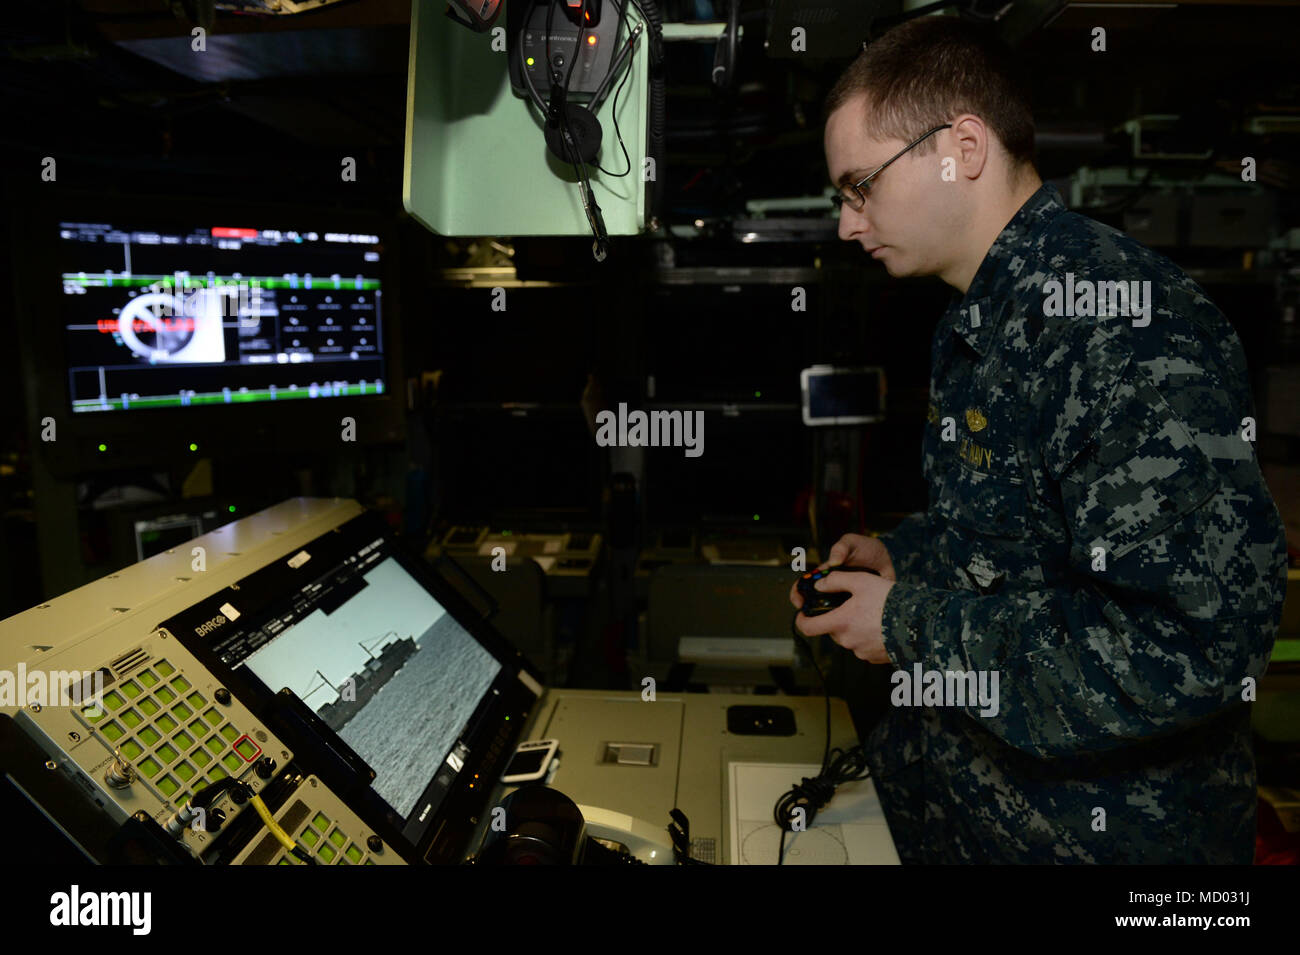 180302-N-LW91-032 GROTON, Conn. (Feb.02, 2018) Lt. jg. William Gregory uses  a XBOX game controller to maneuver the photonic mast aboard  Pre-commissioning Unit Colorado (SSN 788) during a tour of the Colorado.  Colorado